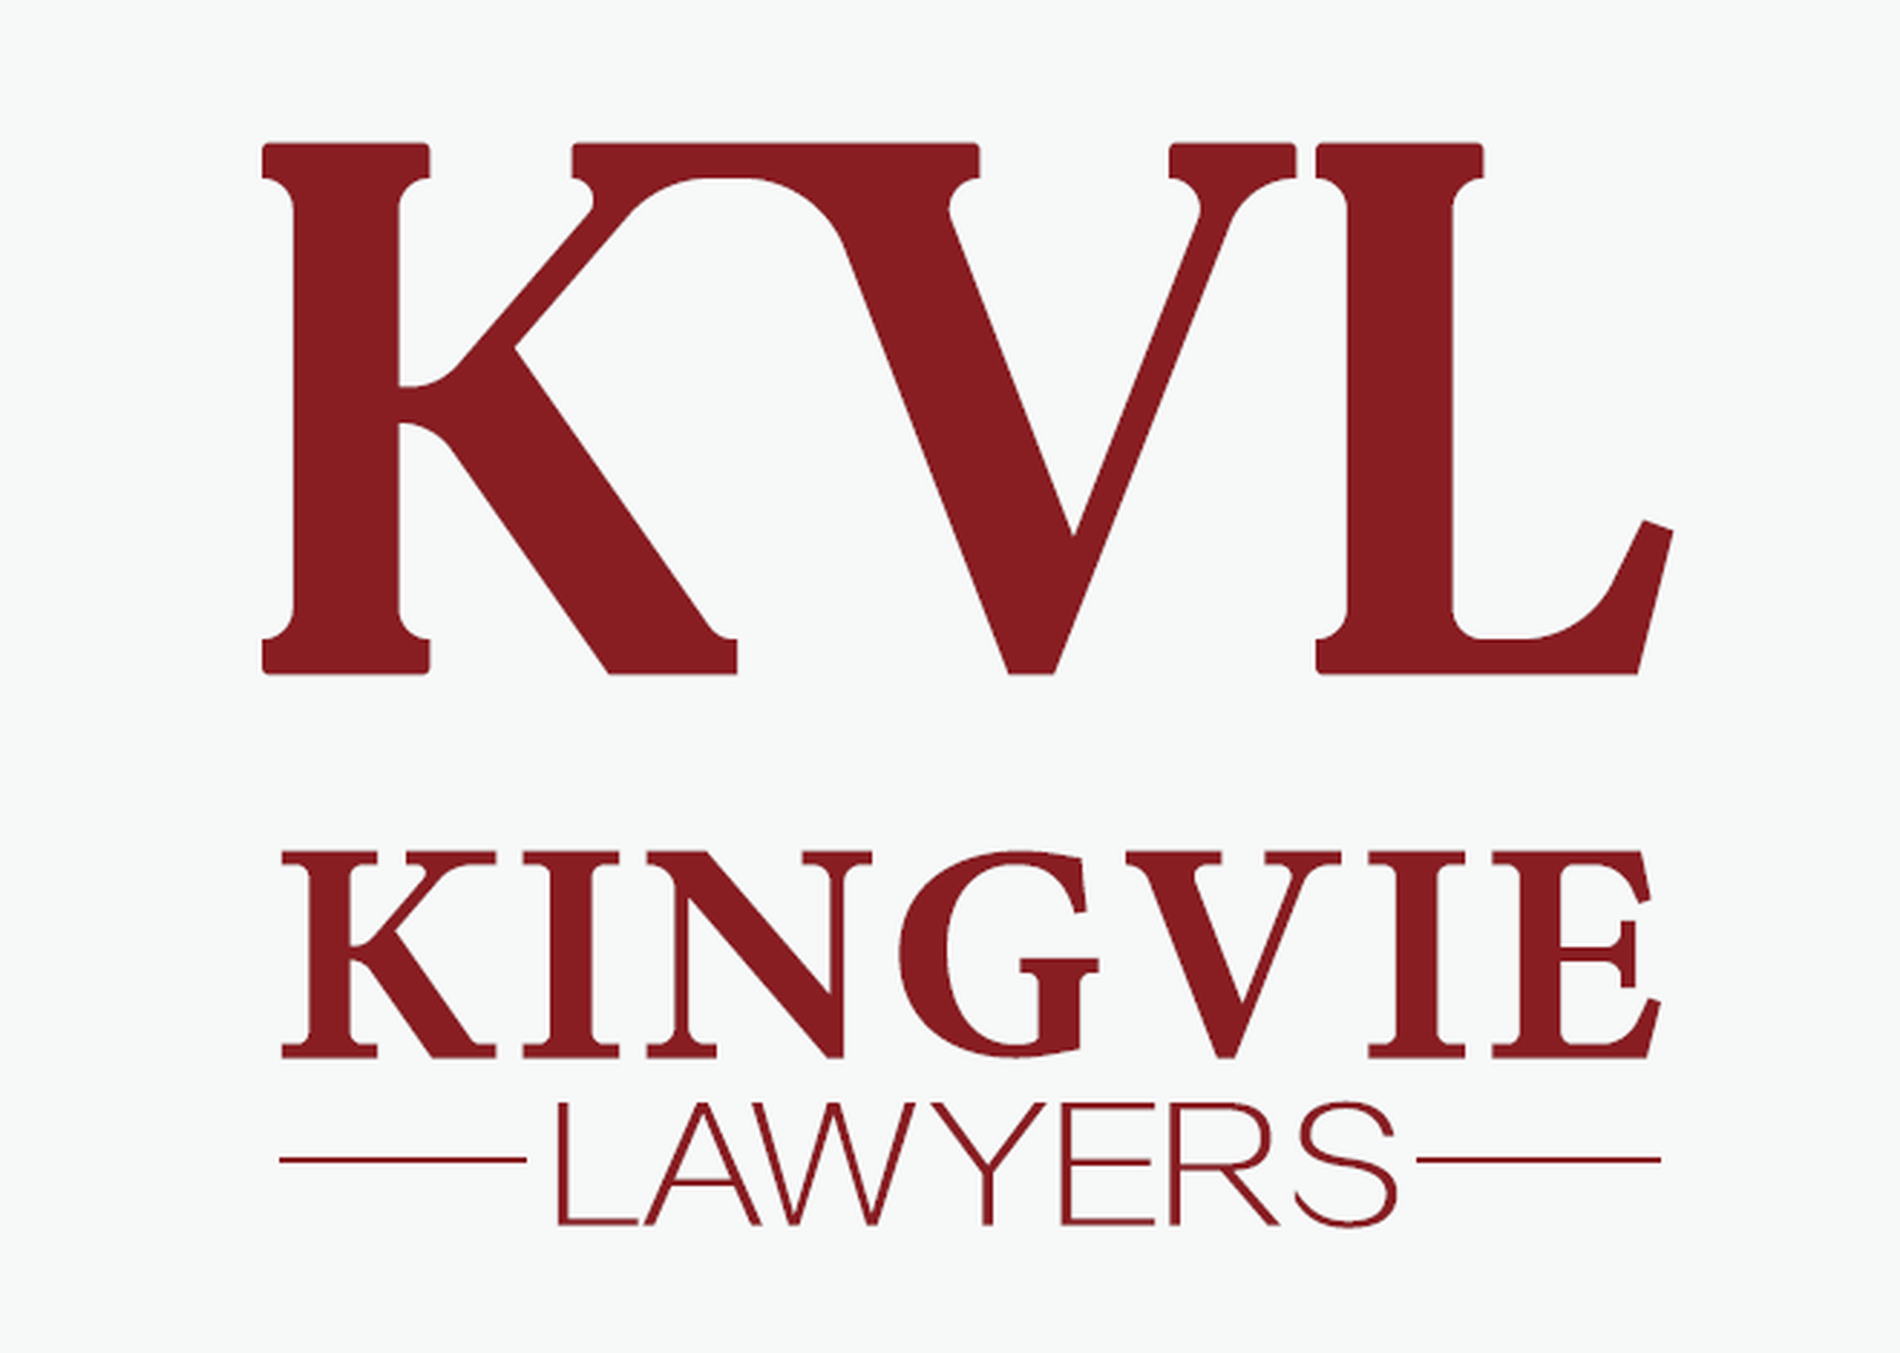 Kingvie Lawyers was founded in 2020. The Firm provides legal service across the P.R. China. Kingvie is a full-service firm, which qualified and competent to provide legal service in all areas of Chinese laws.  Nowadays, with the deepening of social division,Kingvie Lawyers is acting according to how things proceed accurately positioning the field of intellectual property and corporate, and striving to provide all clients with international-standard superior legal services.   Kingvie offers consultation services to companies at home and abroad as well as high net-worth individuals on all aspects of Chinese laws. KingVie boasts broad range of practice and is confident of providing comprehensive solutions for each specific client matter, based upon a thorough understanding of all relevant legal issues. KingVie spares no efforts to reach excellence and innovation and work relentlessly to deliver outstanding legal service. Its expertise, implementation, and training services, and ongoing support services deserve trustfrom its wide customer base around the world.  By analyzing the global intellectual property portfolio strategy of clients, KingVie creatively moves forward the node of relevant legal services, and goes all out to investigate and correct possible hidden risks by providing high-quality legal counsel services for enterprises, so as to  revolutionize the legal services space and escort the development of enterprises.  KingVie is committed to providing outstanding client service and excelling in the practice of law. The partners of the firm are easily accessible, and actively engage in every stage of the transaction. It remains focused on consistentlyclients and their needs, actively listening to their suggestions and implementing many of their great ideas into the bespoken legal services.  KingVie also prides itself in our ongoing customer care. It sets out to provide prompt, favorable, friendly and knowledgeable support to help resolve any questions or issues that arise.  Above all, KingVie has a cost-competitive billing structure that offers various options like a upfront, lump-sum, and hourly basis to meet various needs of clients. 